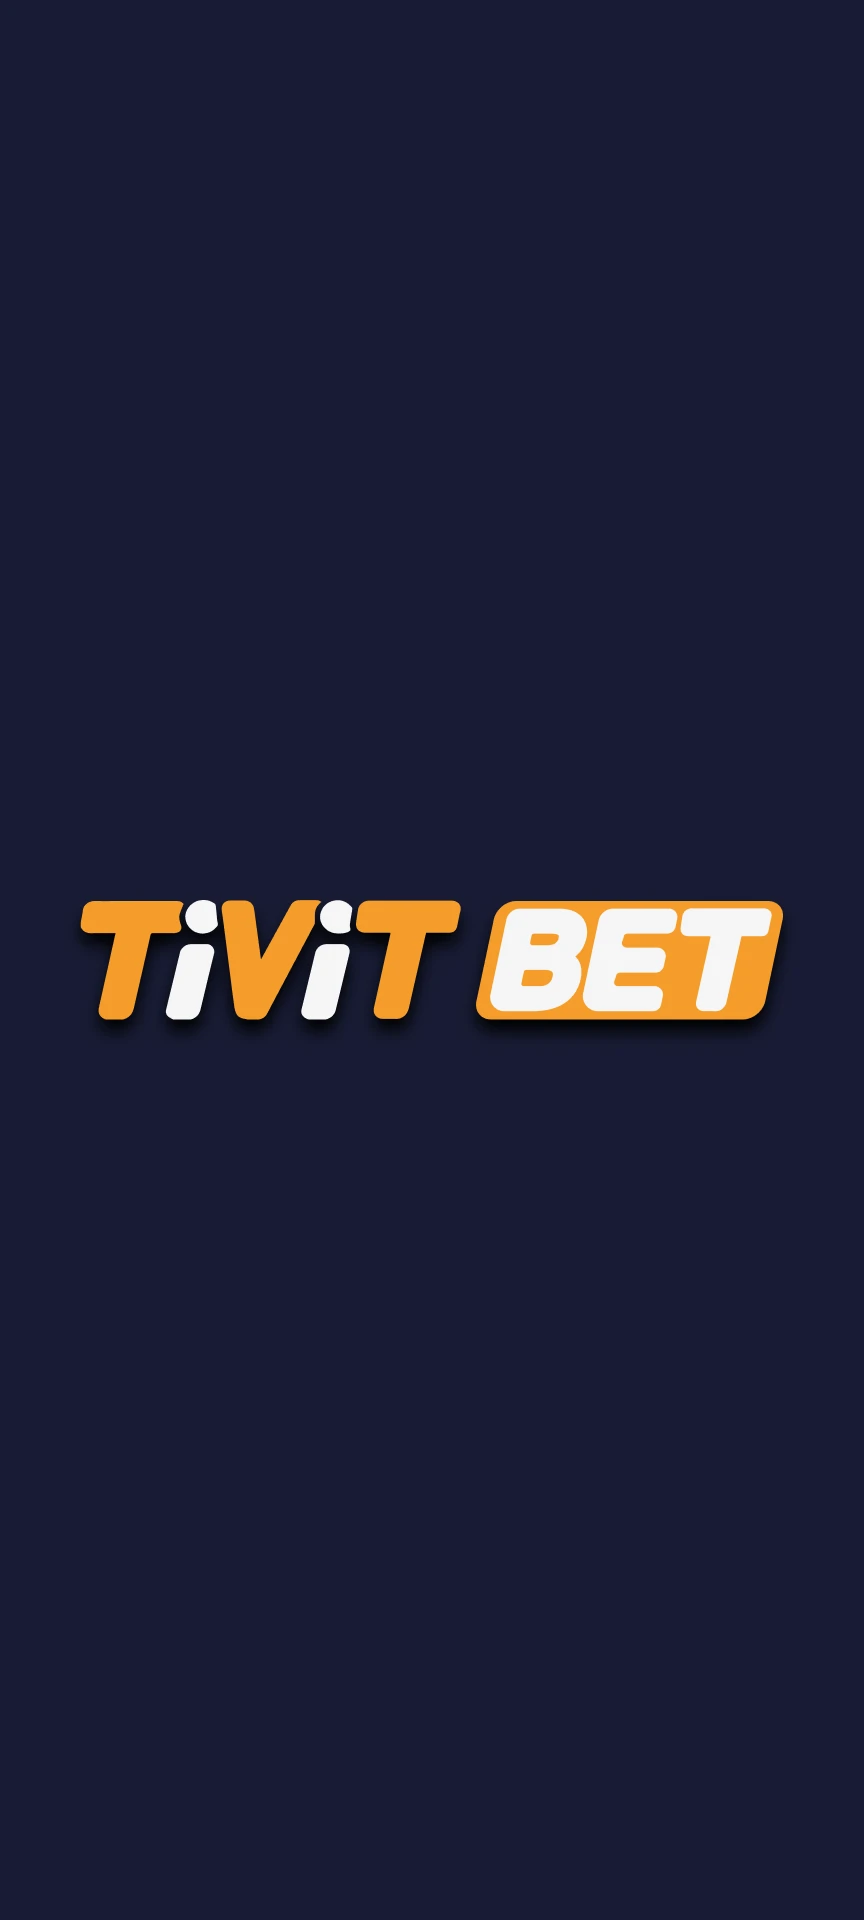 You can now launch the Tivitbet application.